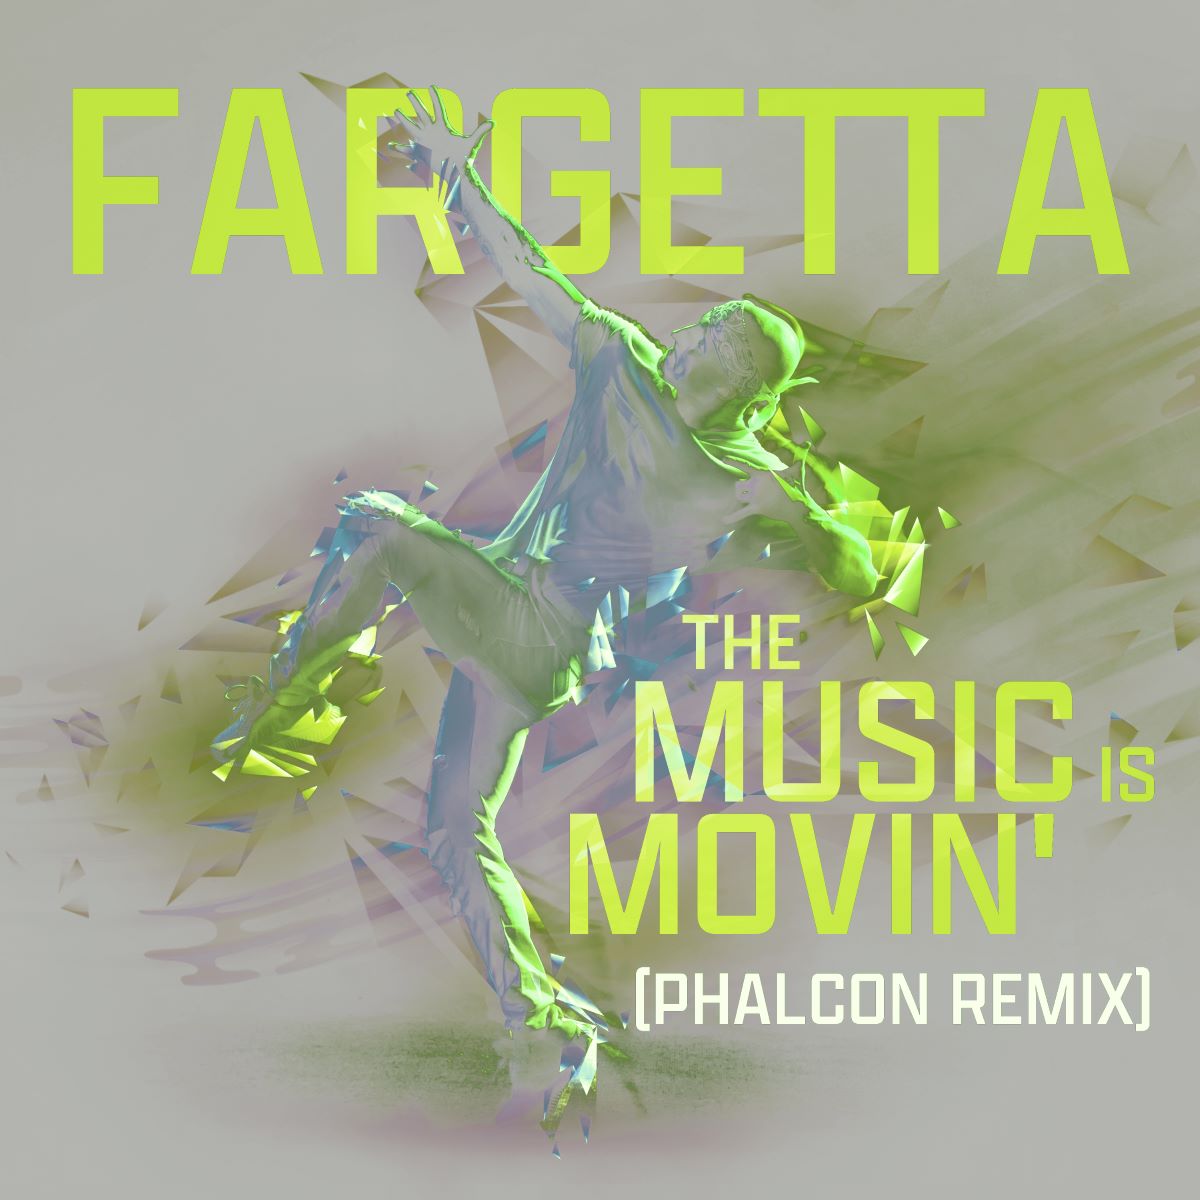 Fargetta – The Music Is Movin’ (Phalcon Remix) DIG 160858